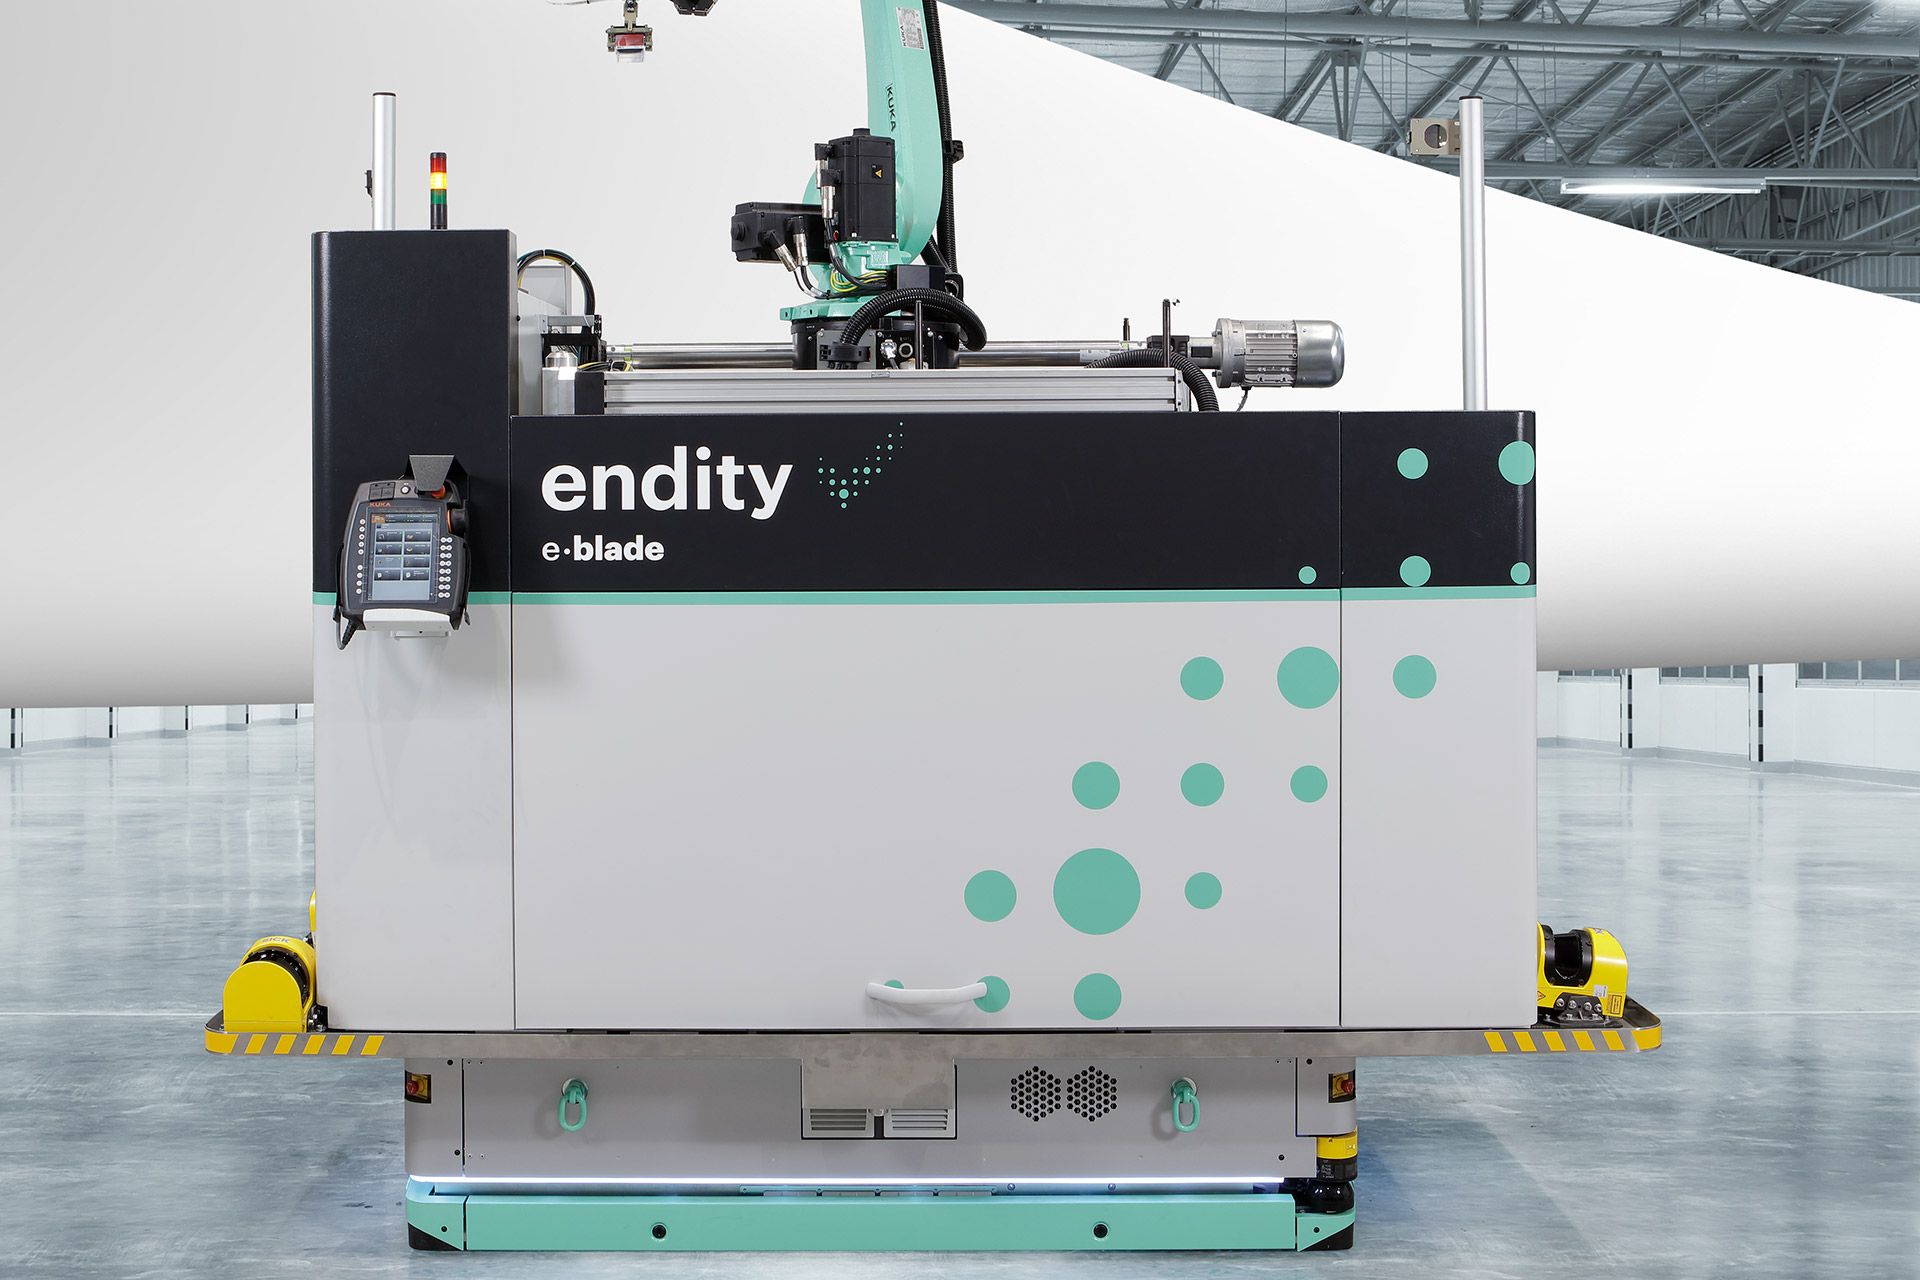 Endity offers turnkey inspection solutions to verify the condition and quality of components